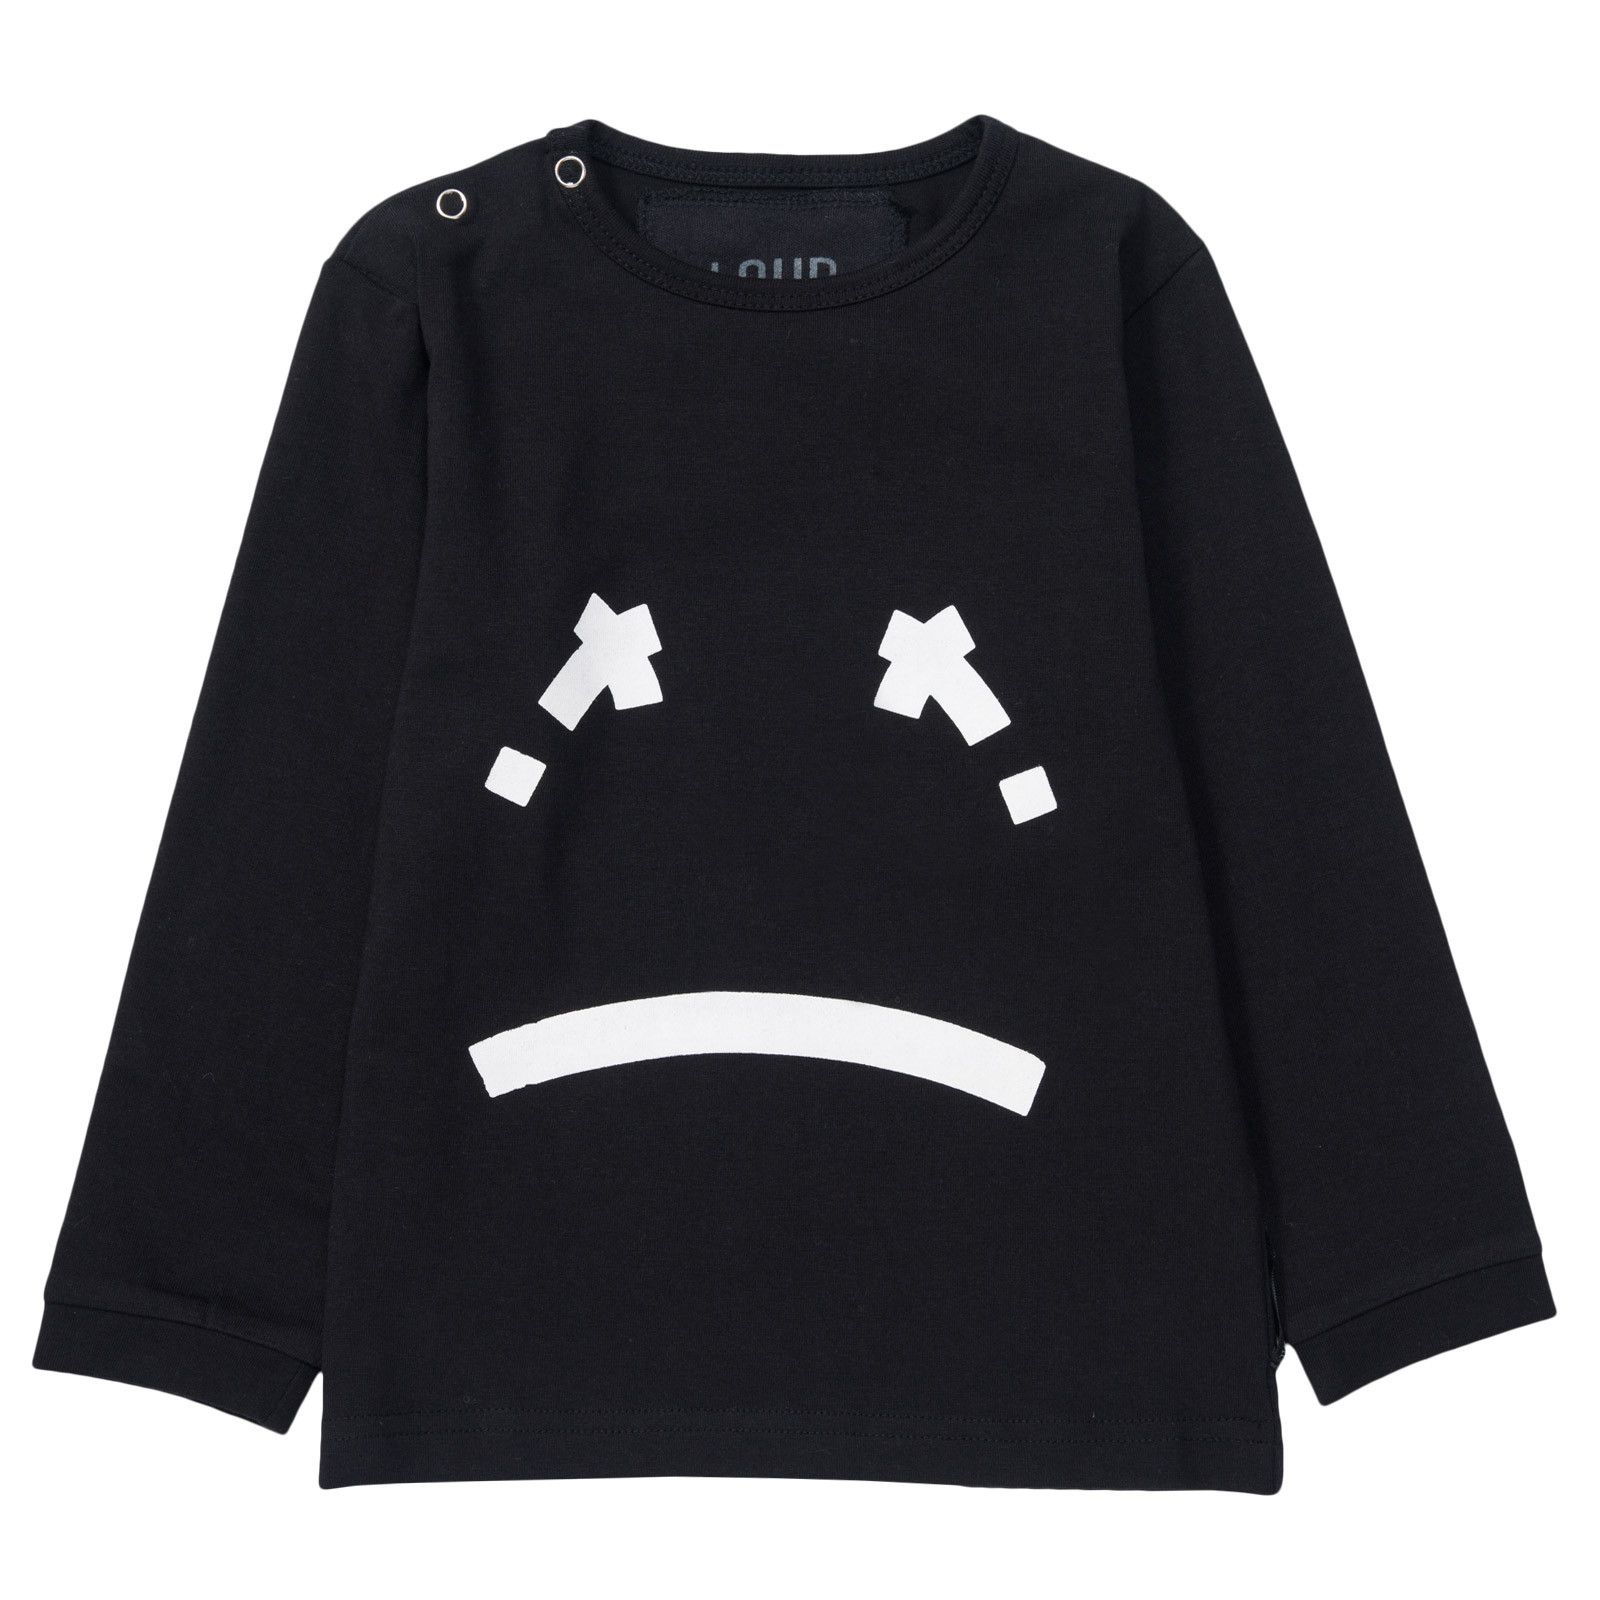 Baby Black T-Shirt With White Printed X Tears Face - CÉMAROSE | Children's Fashion Store - 1